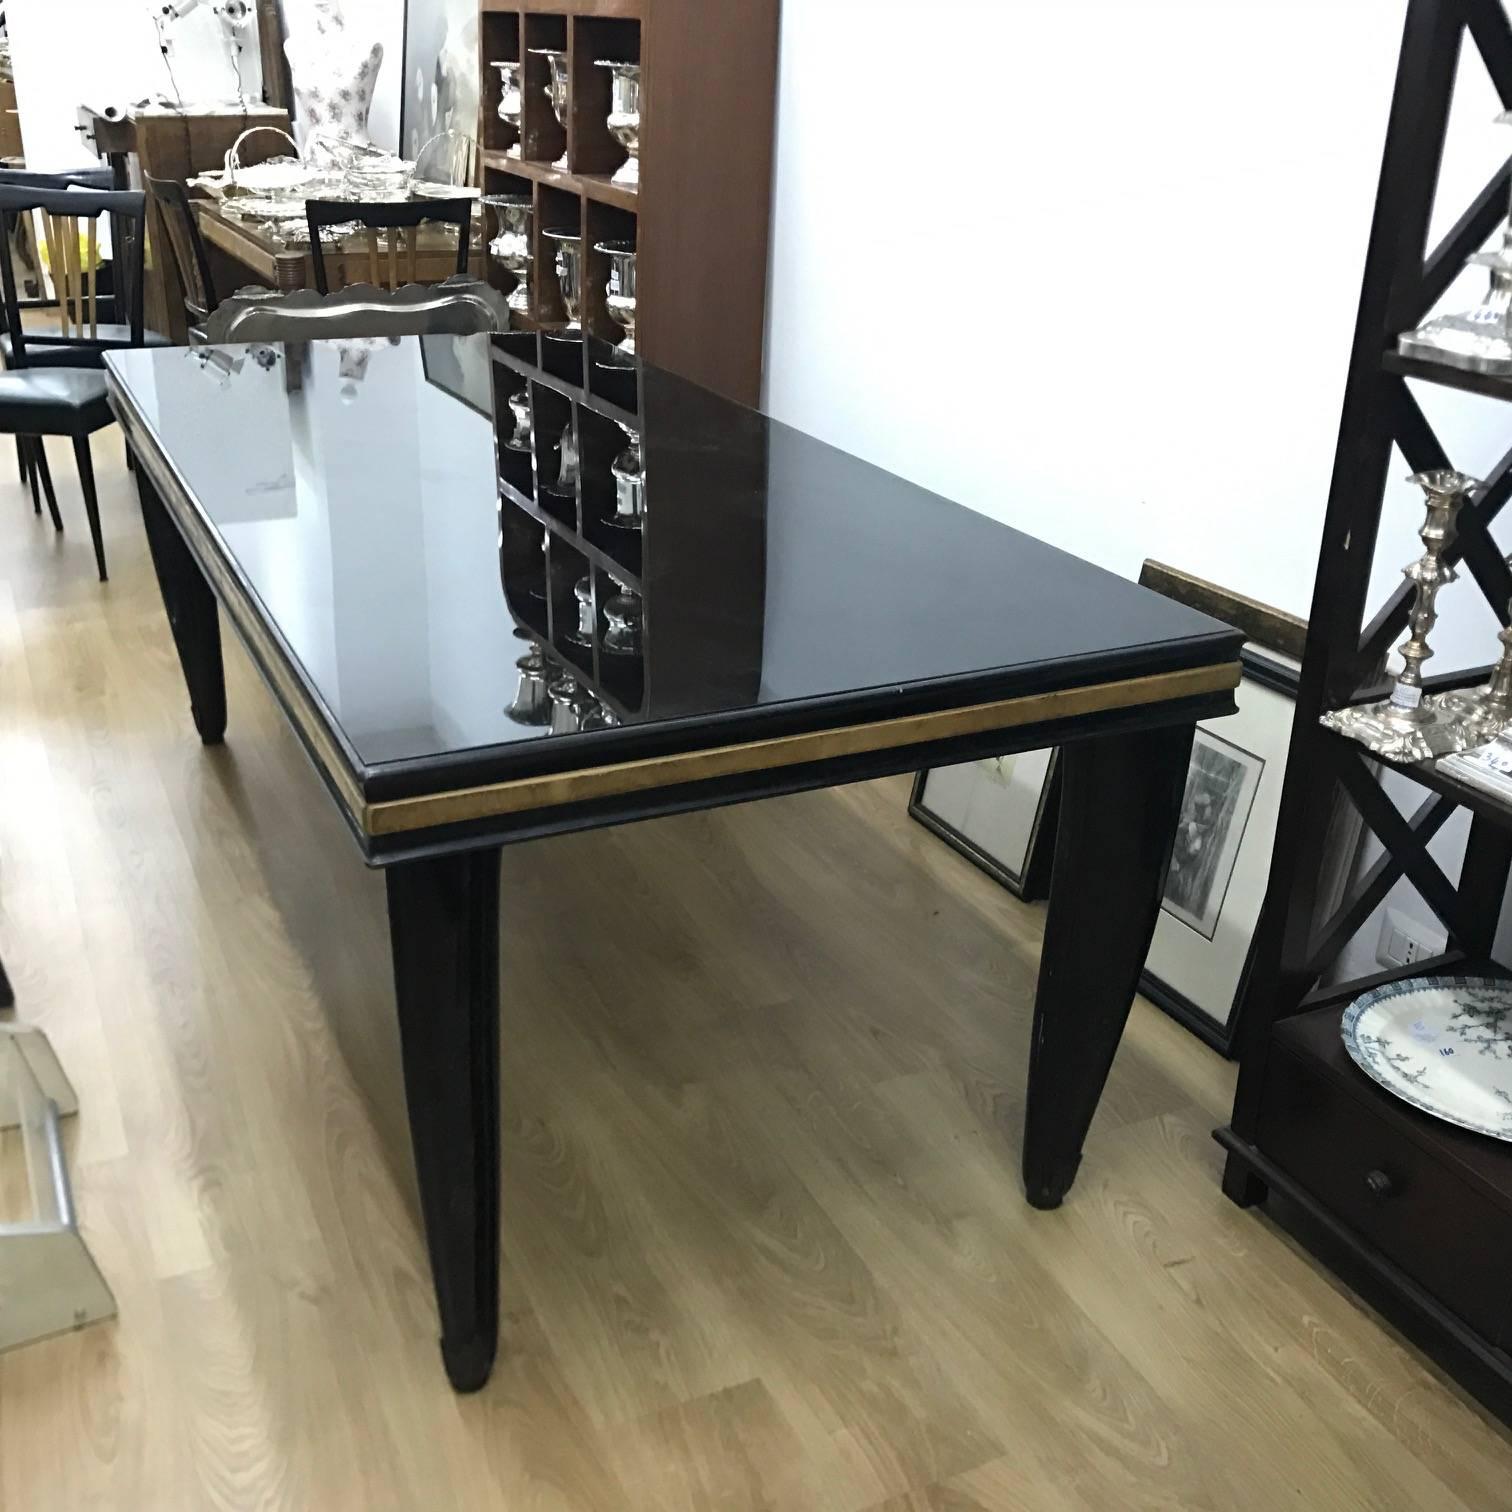 Superb quality Italian dining table, black glass on the top, three colors of wood, big size and good conditions overall.